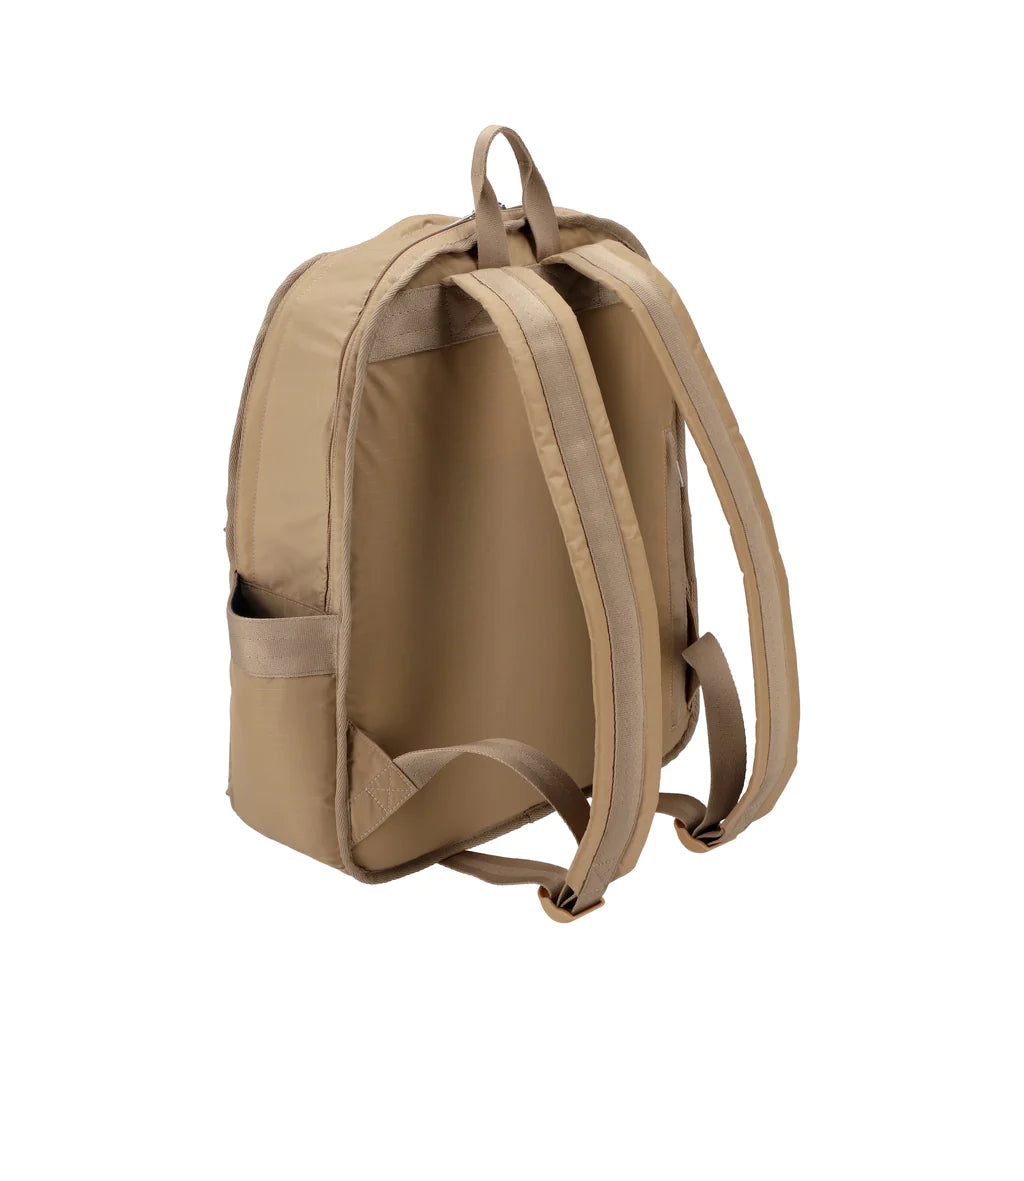 Route Backpack<br>Provincial